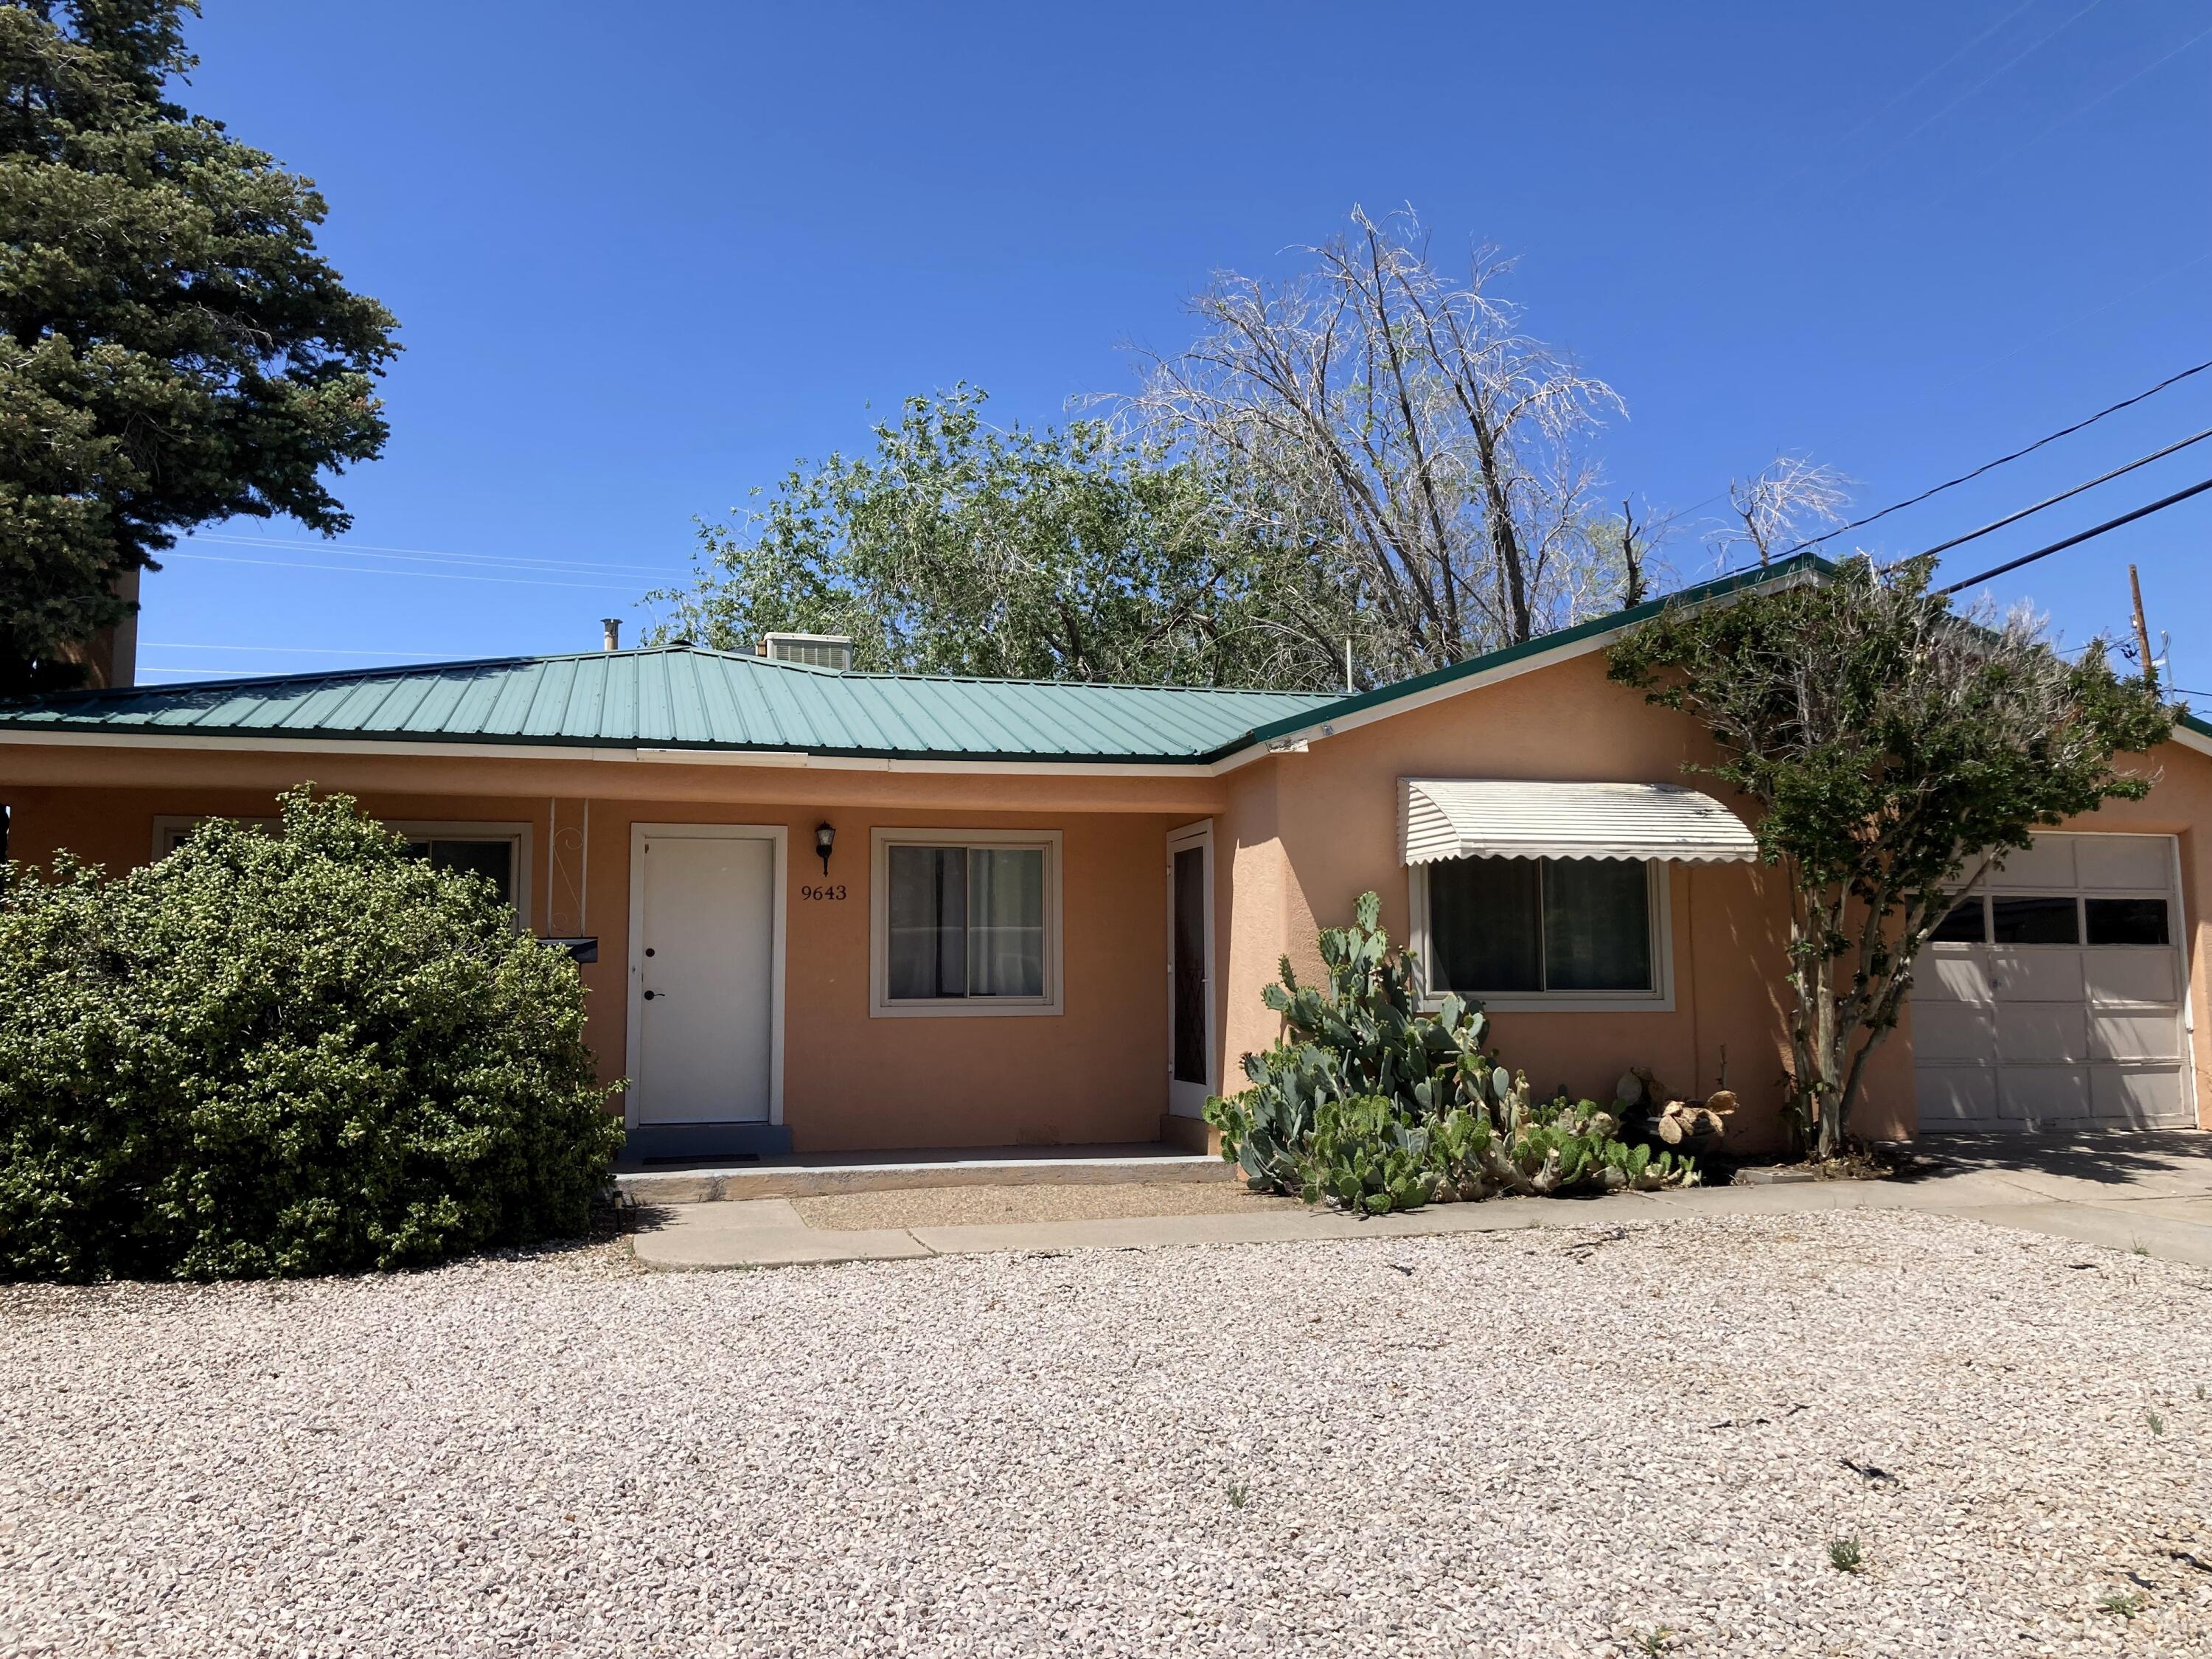 This home in Albuquerque's Northeast Heights area offers 4 beds, 2 baths, a converted garage space, and a pitched metal roof. Outside, a fenced backyard with a storage shed awaits. Conveniently located near parks and shopping. Schedule your showing today!